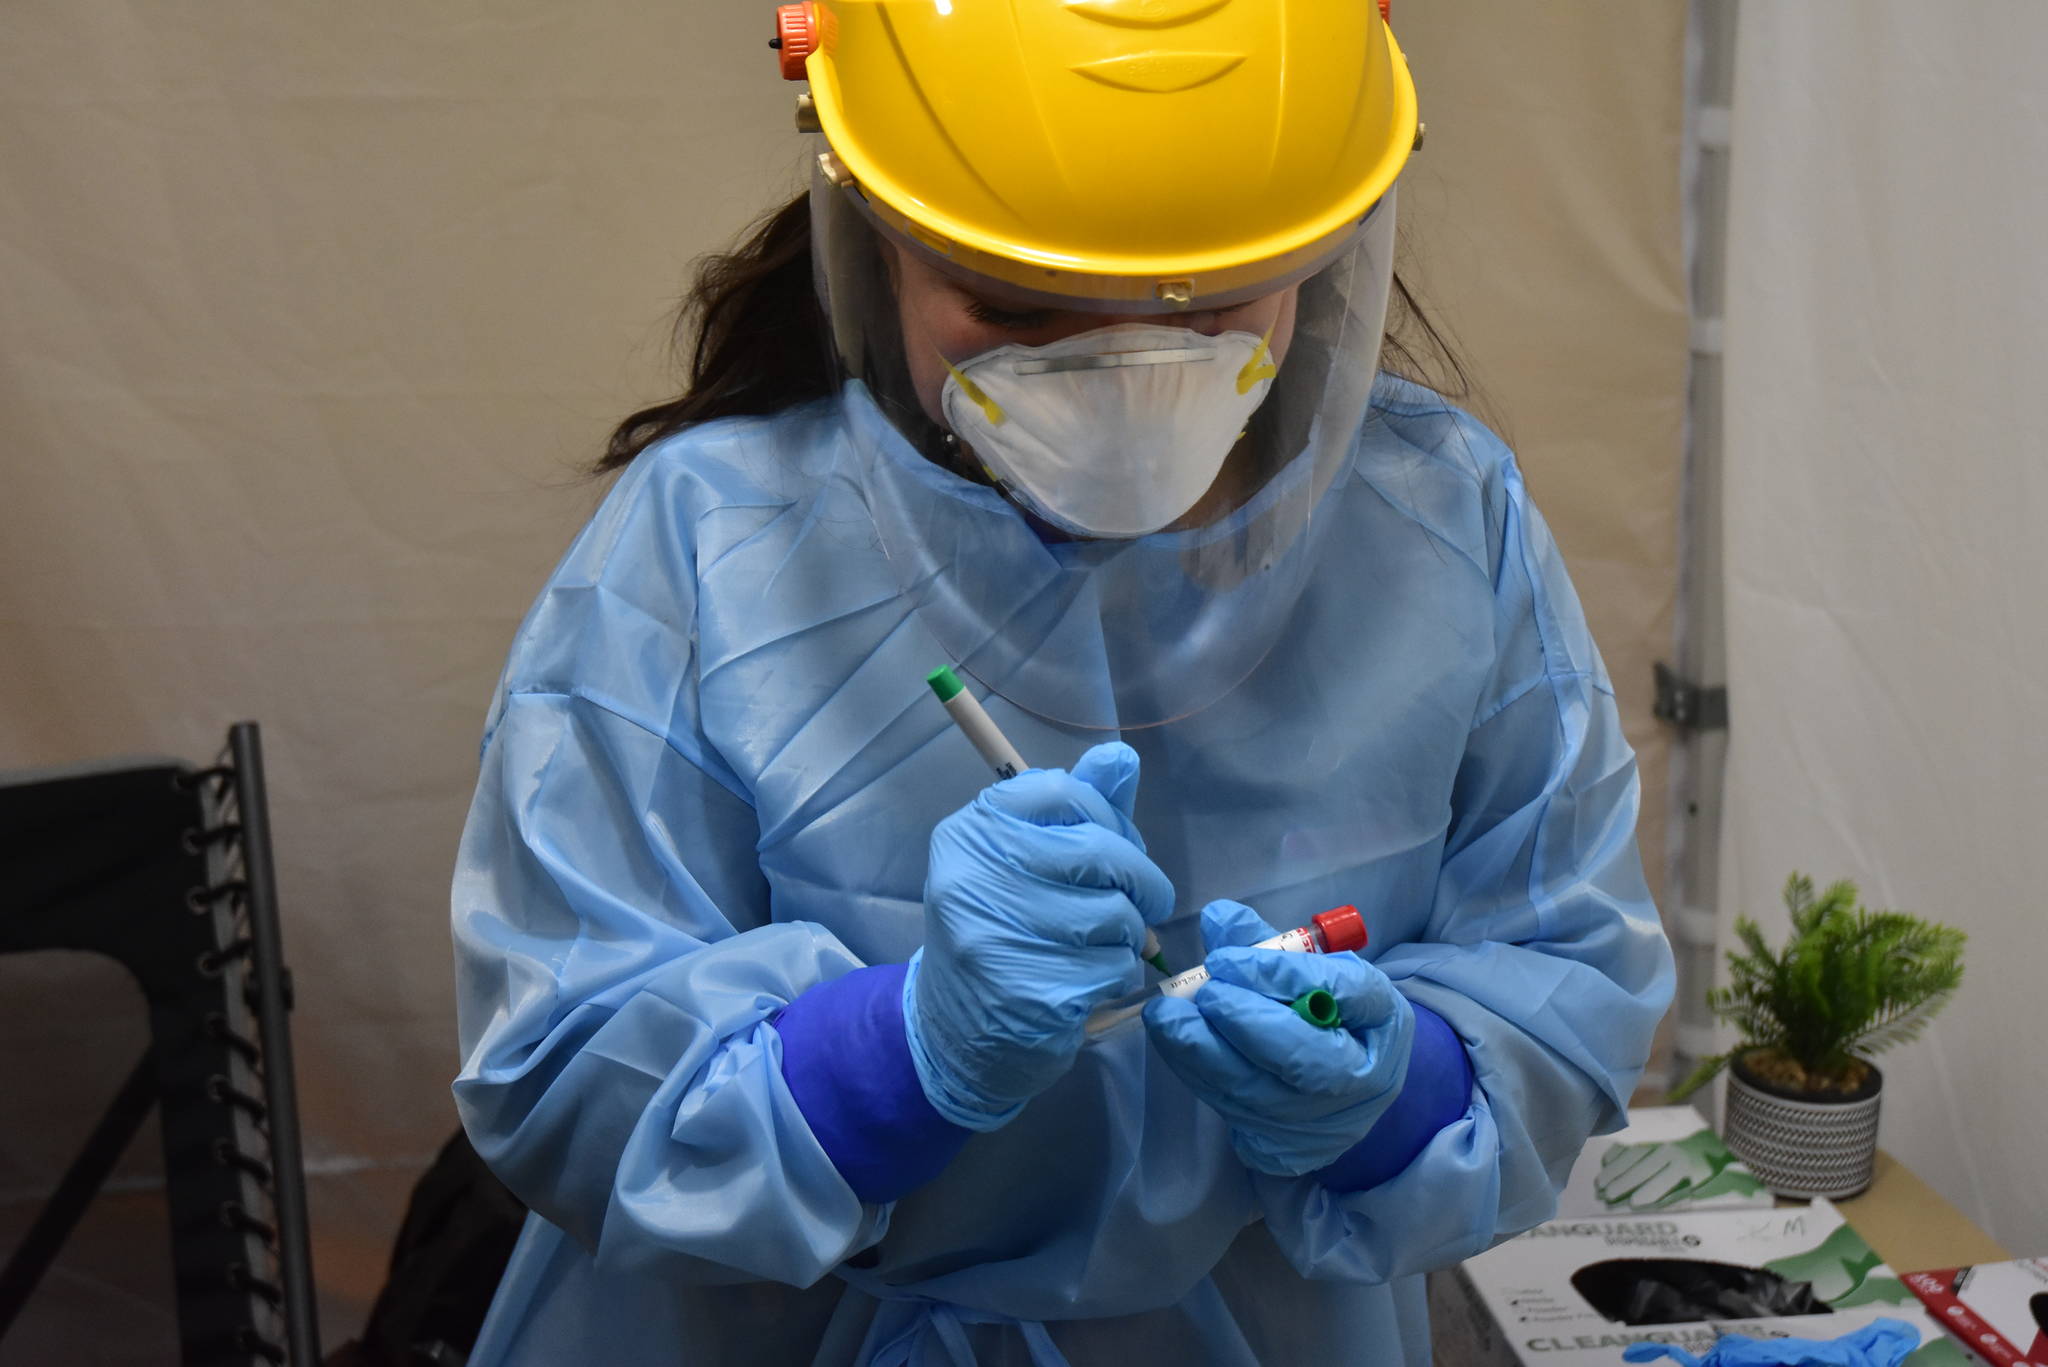 Emergency worker Melanie Chavez takes a COVID-19 test sample at the Juneau International Airport screening site on Monday, Oct. 12, 2020. The City and Borough of Juneau announced 17 new COVID-19 cases over a three-day period. (Peter Segall / Juneau Empire)